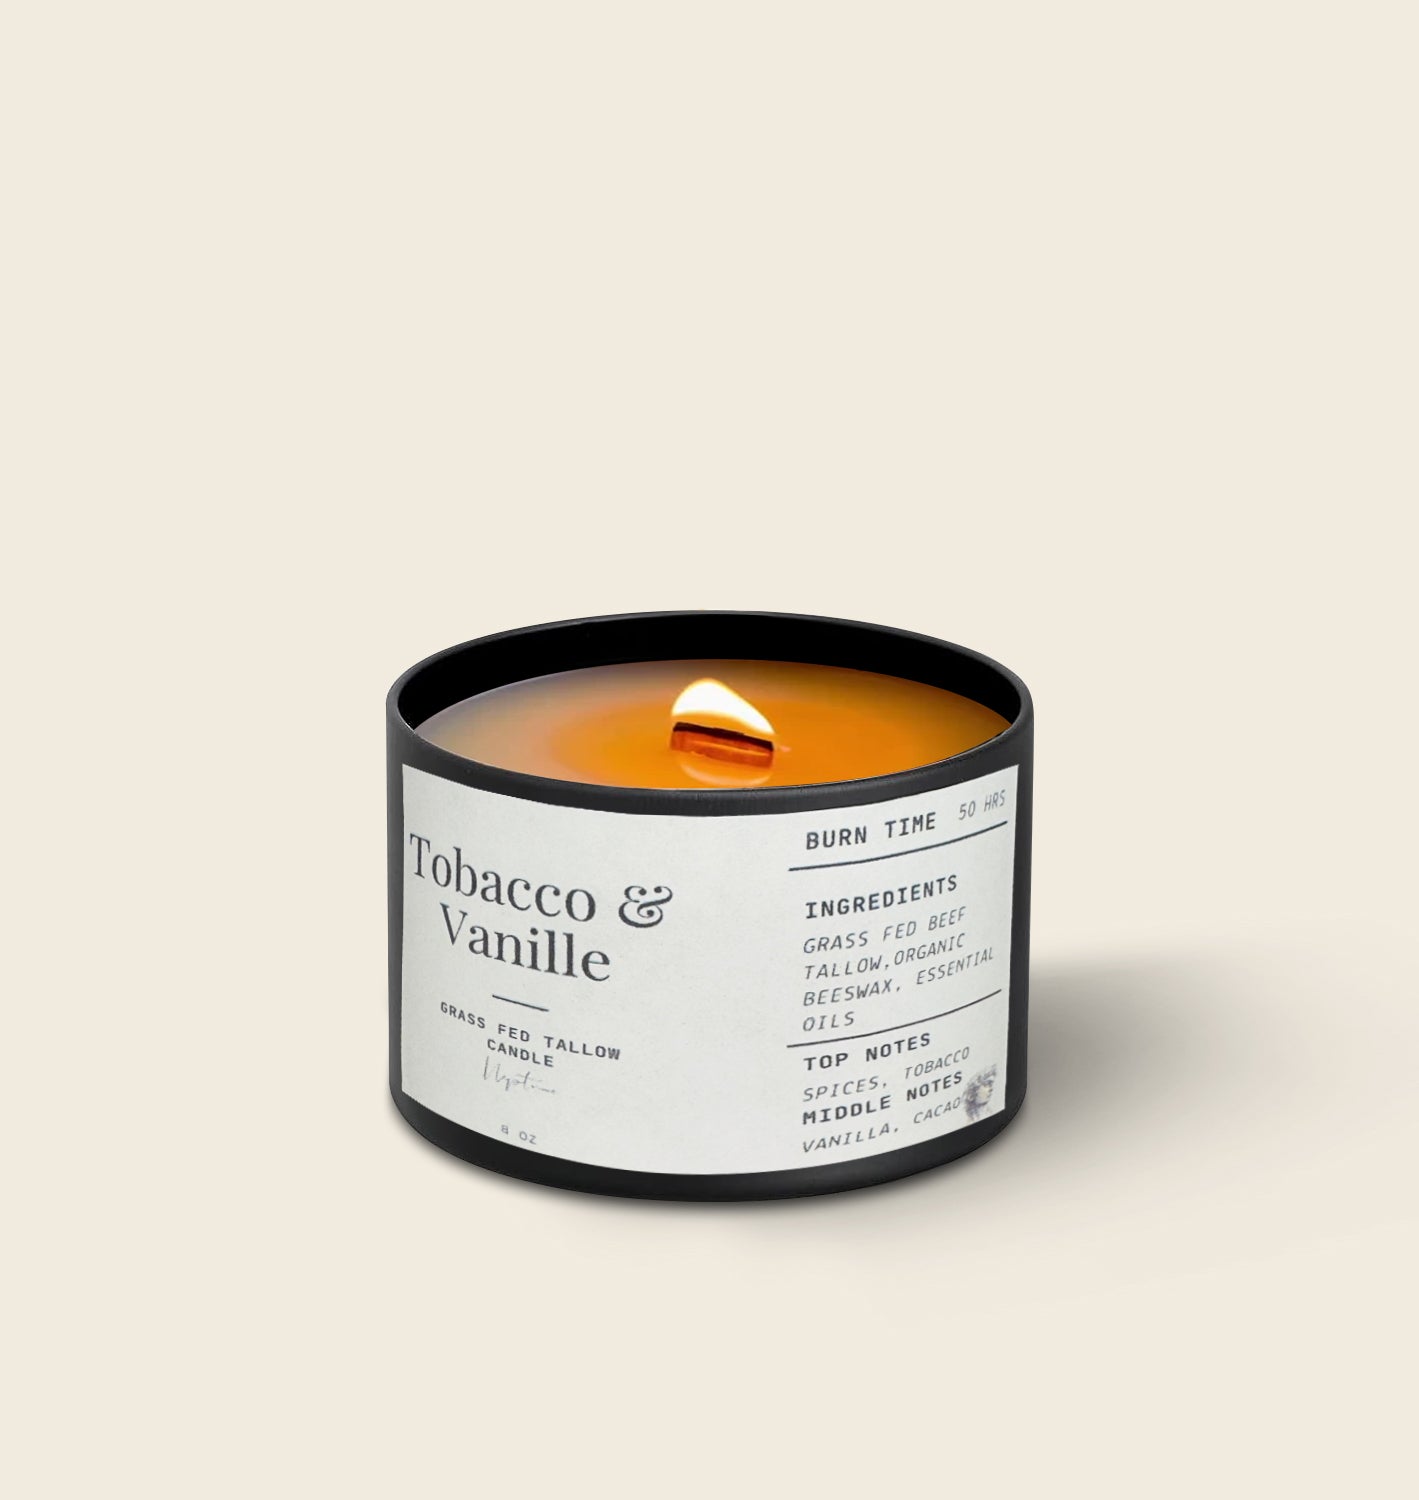 Neptune Grass Fed Tallow Candle